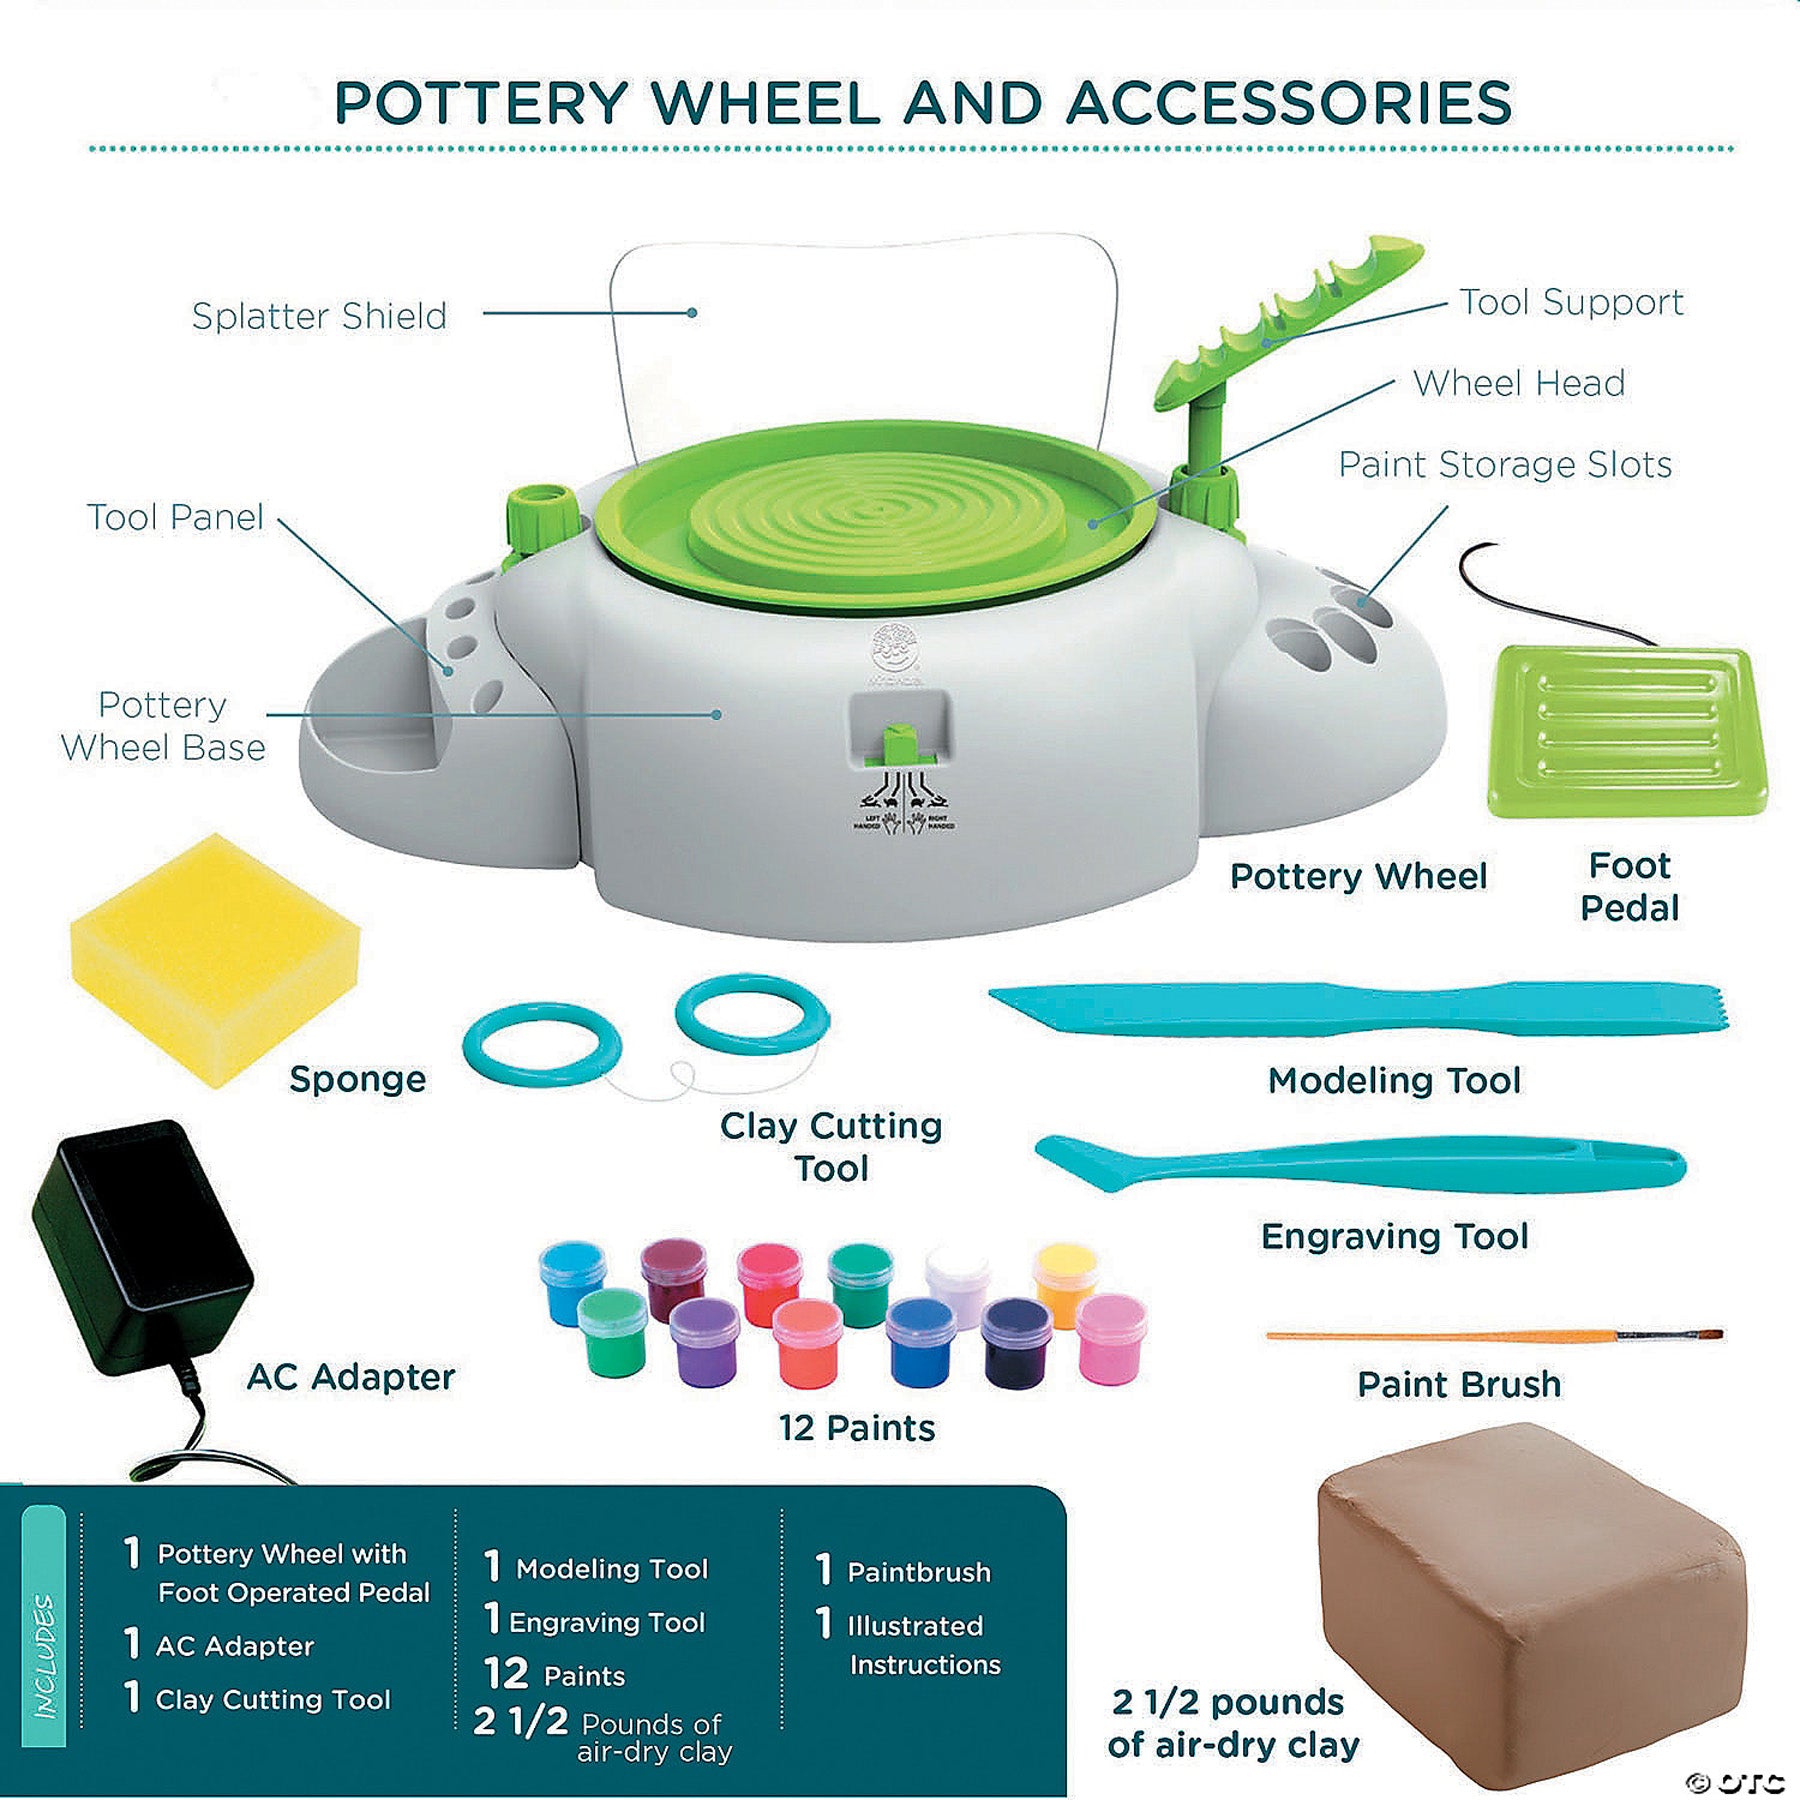 How to choose the right pottery wheel for beginners